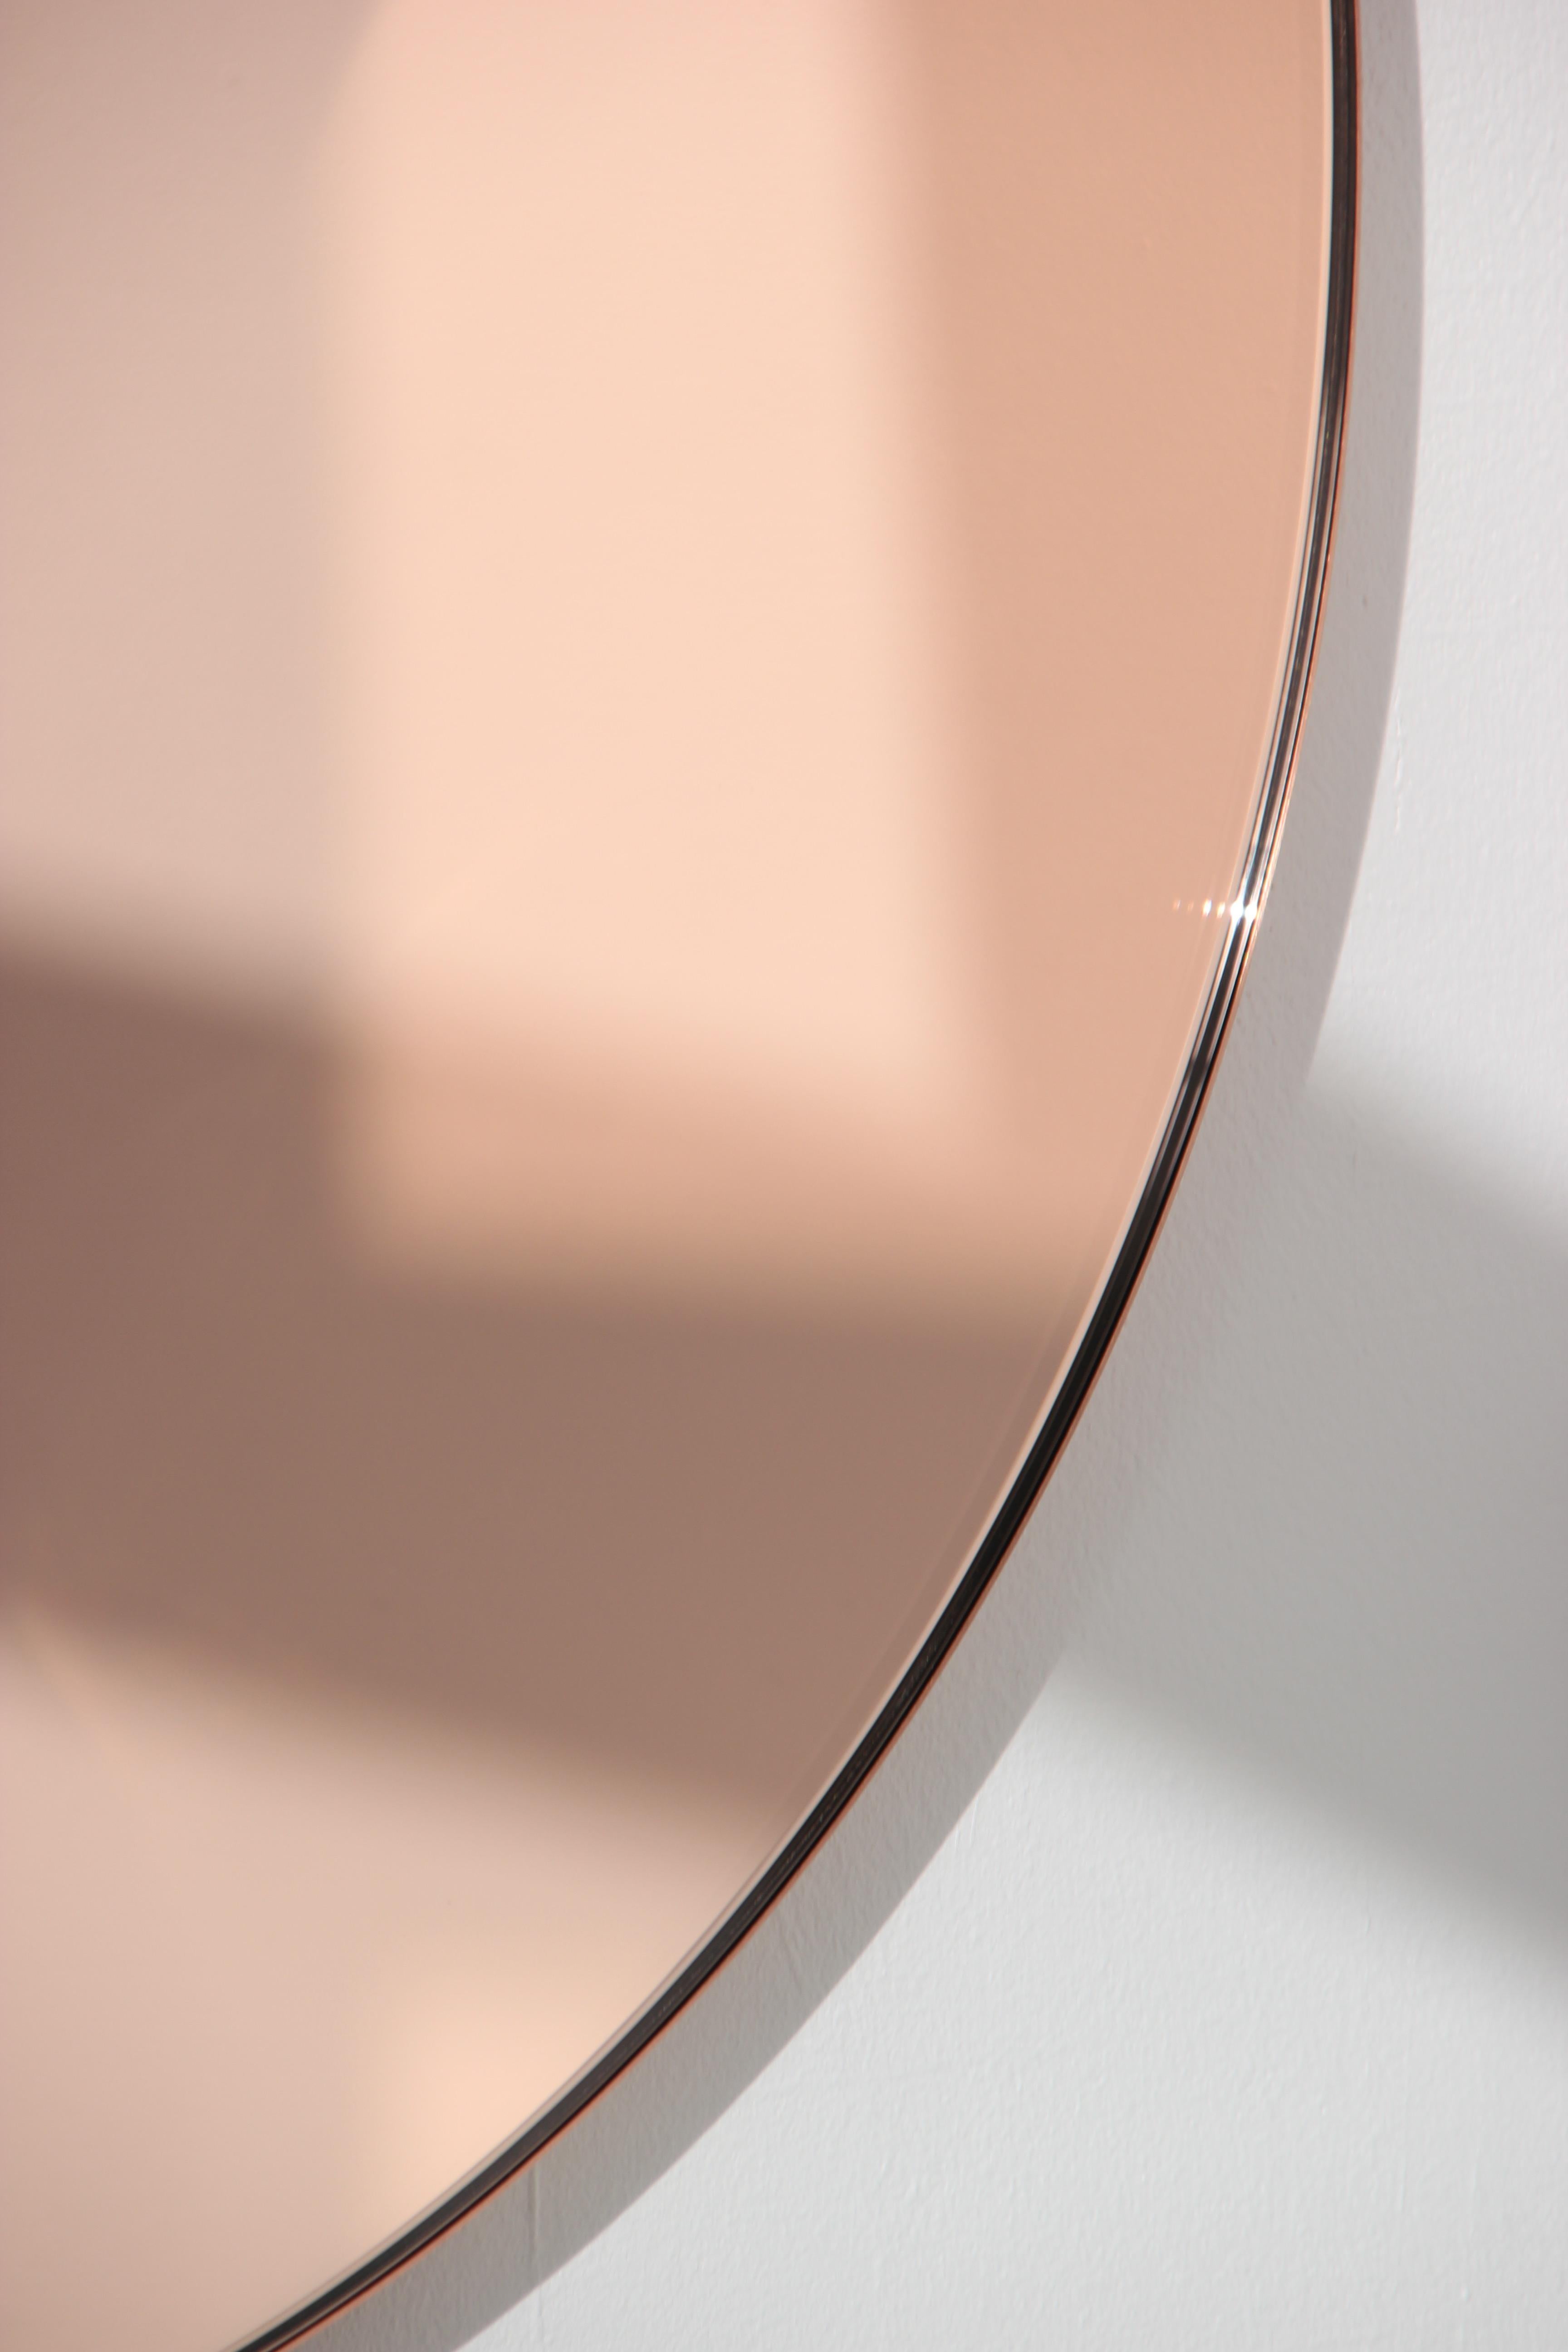 British Orbis Rose Gold Tinted Round Contemporary Mirror with Copper Frame, Large For Sale